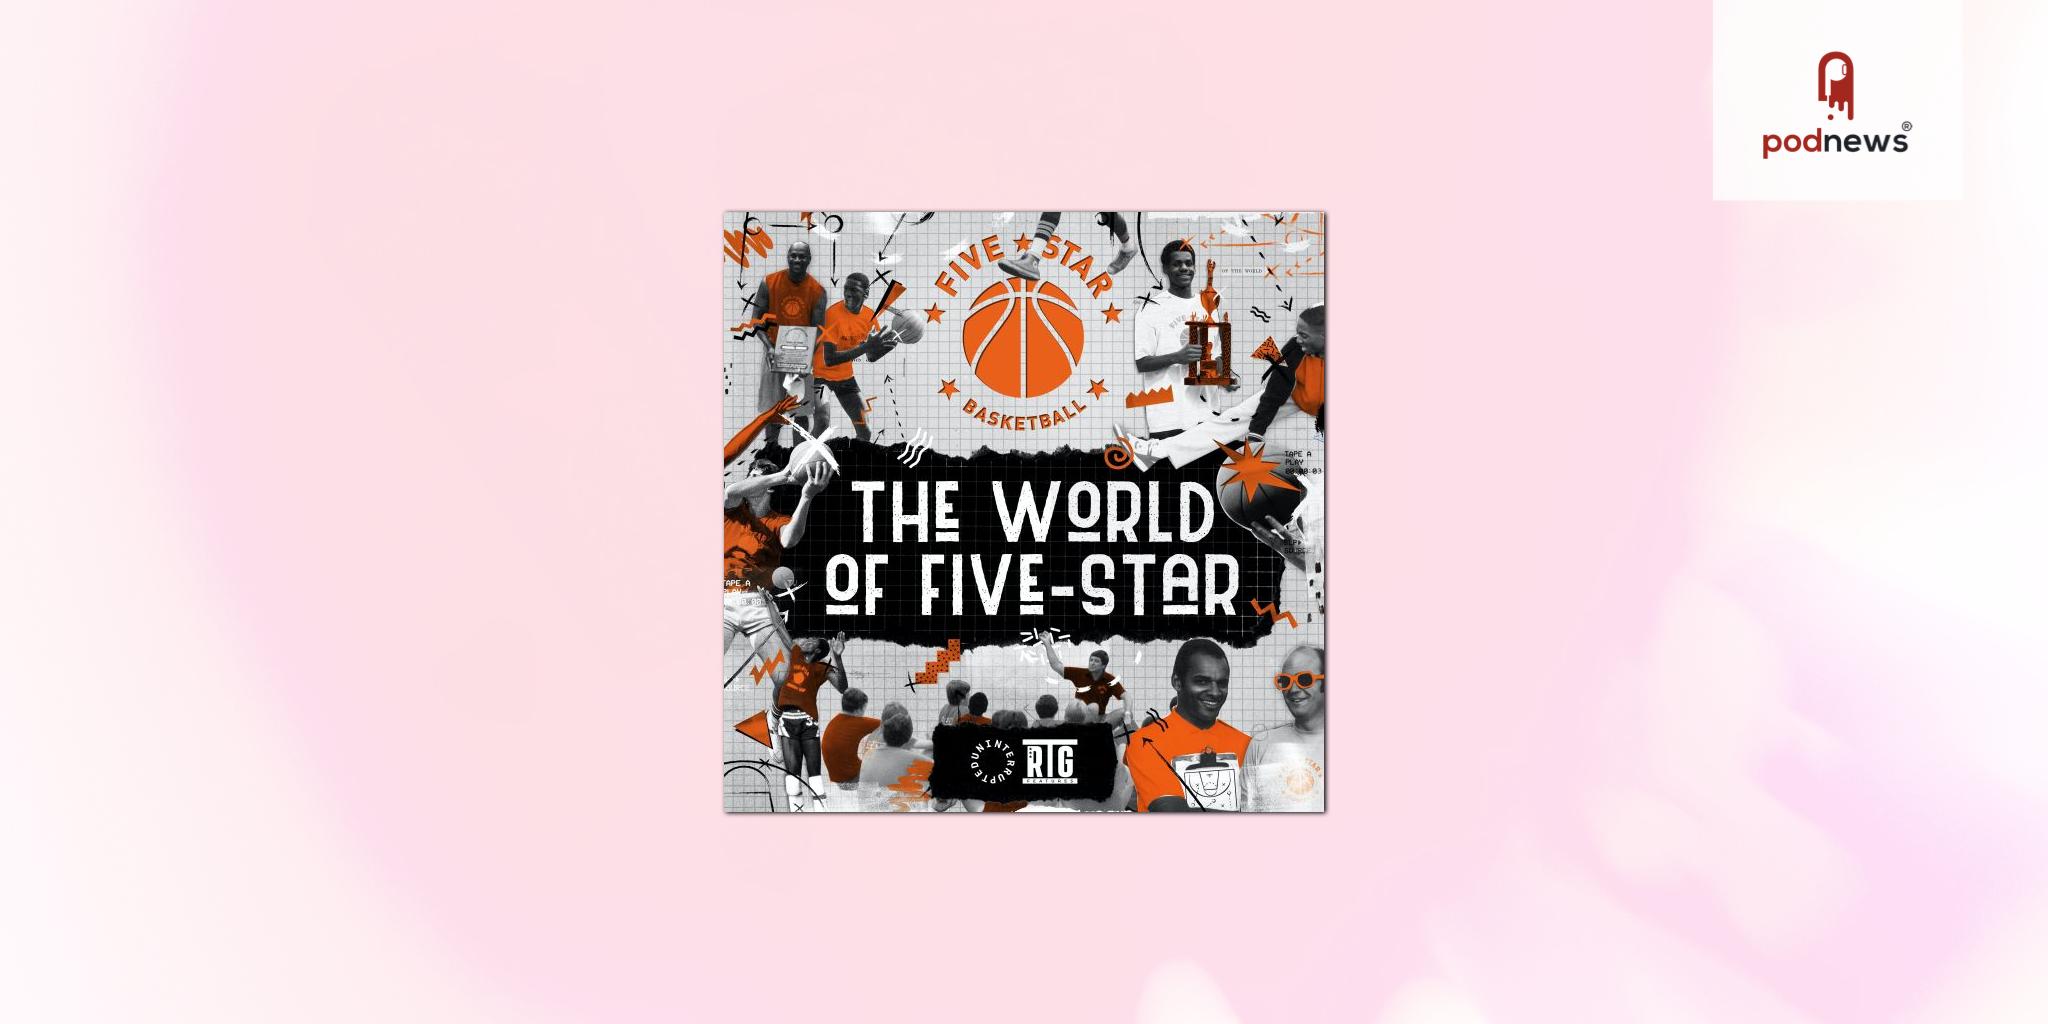 The World of Five-Star basketball podcast drops first teaser for series